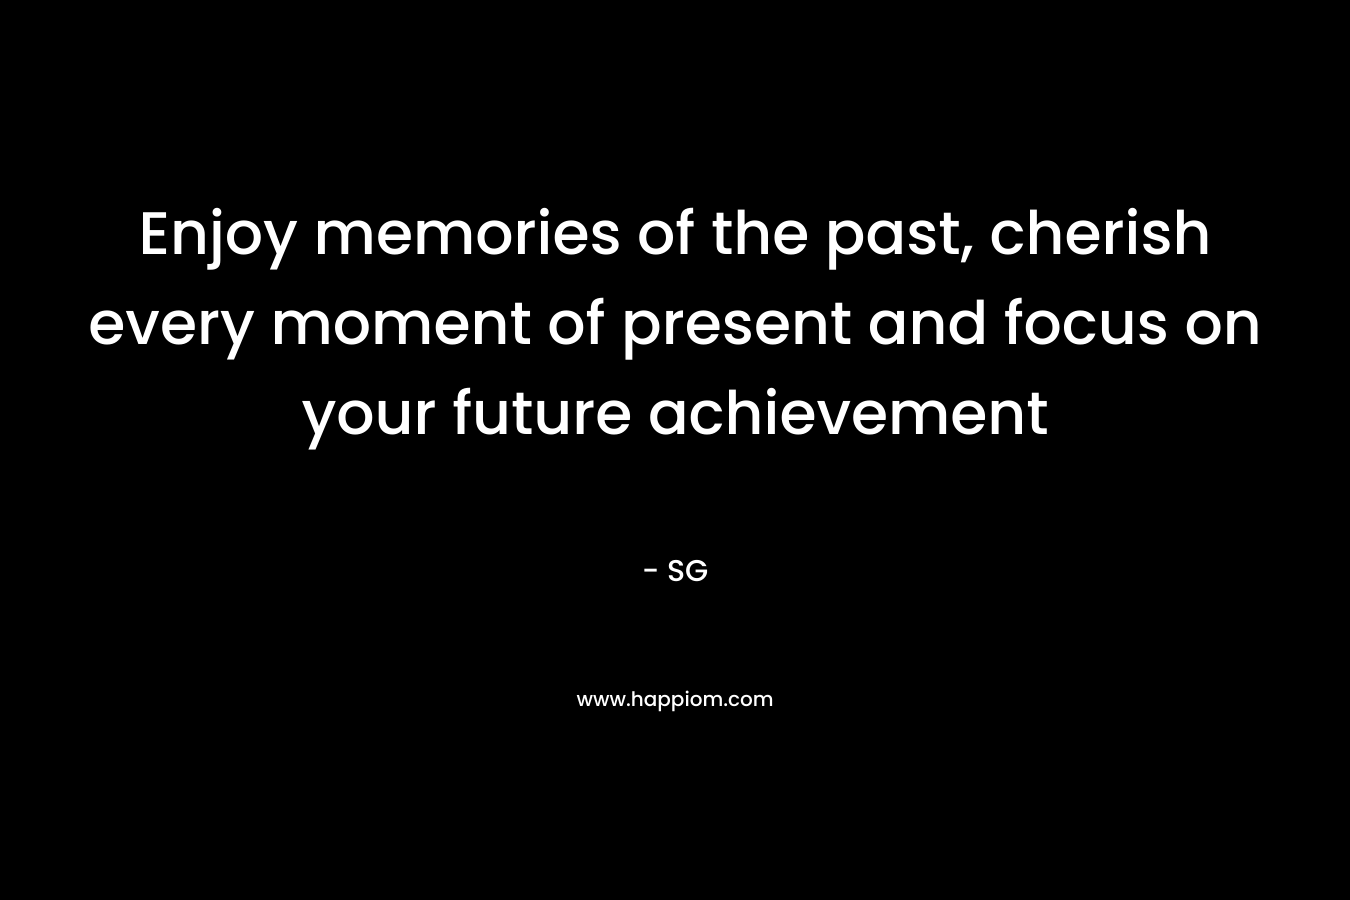 Enjoy memories of the past, cherish every moment of present and focus on your future achievement